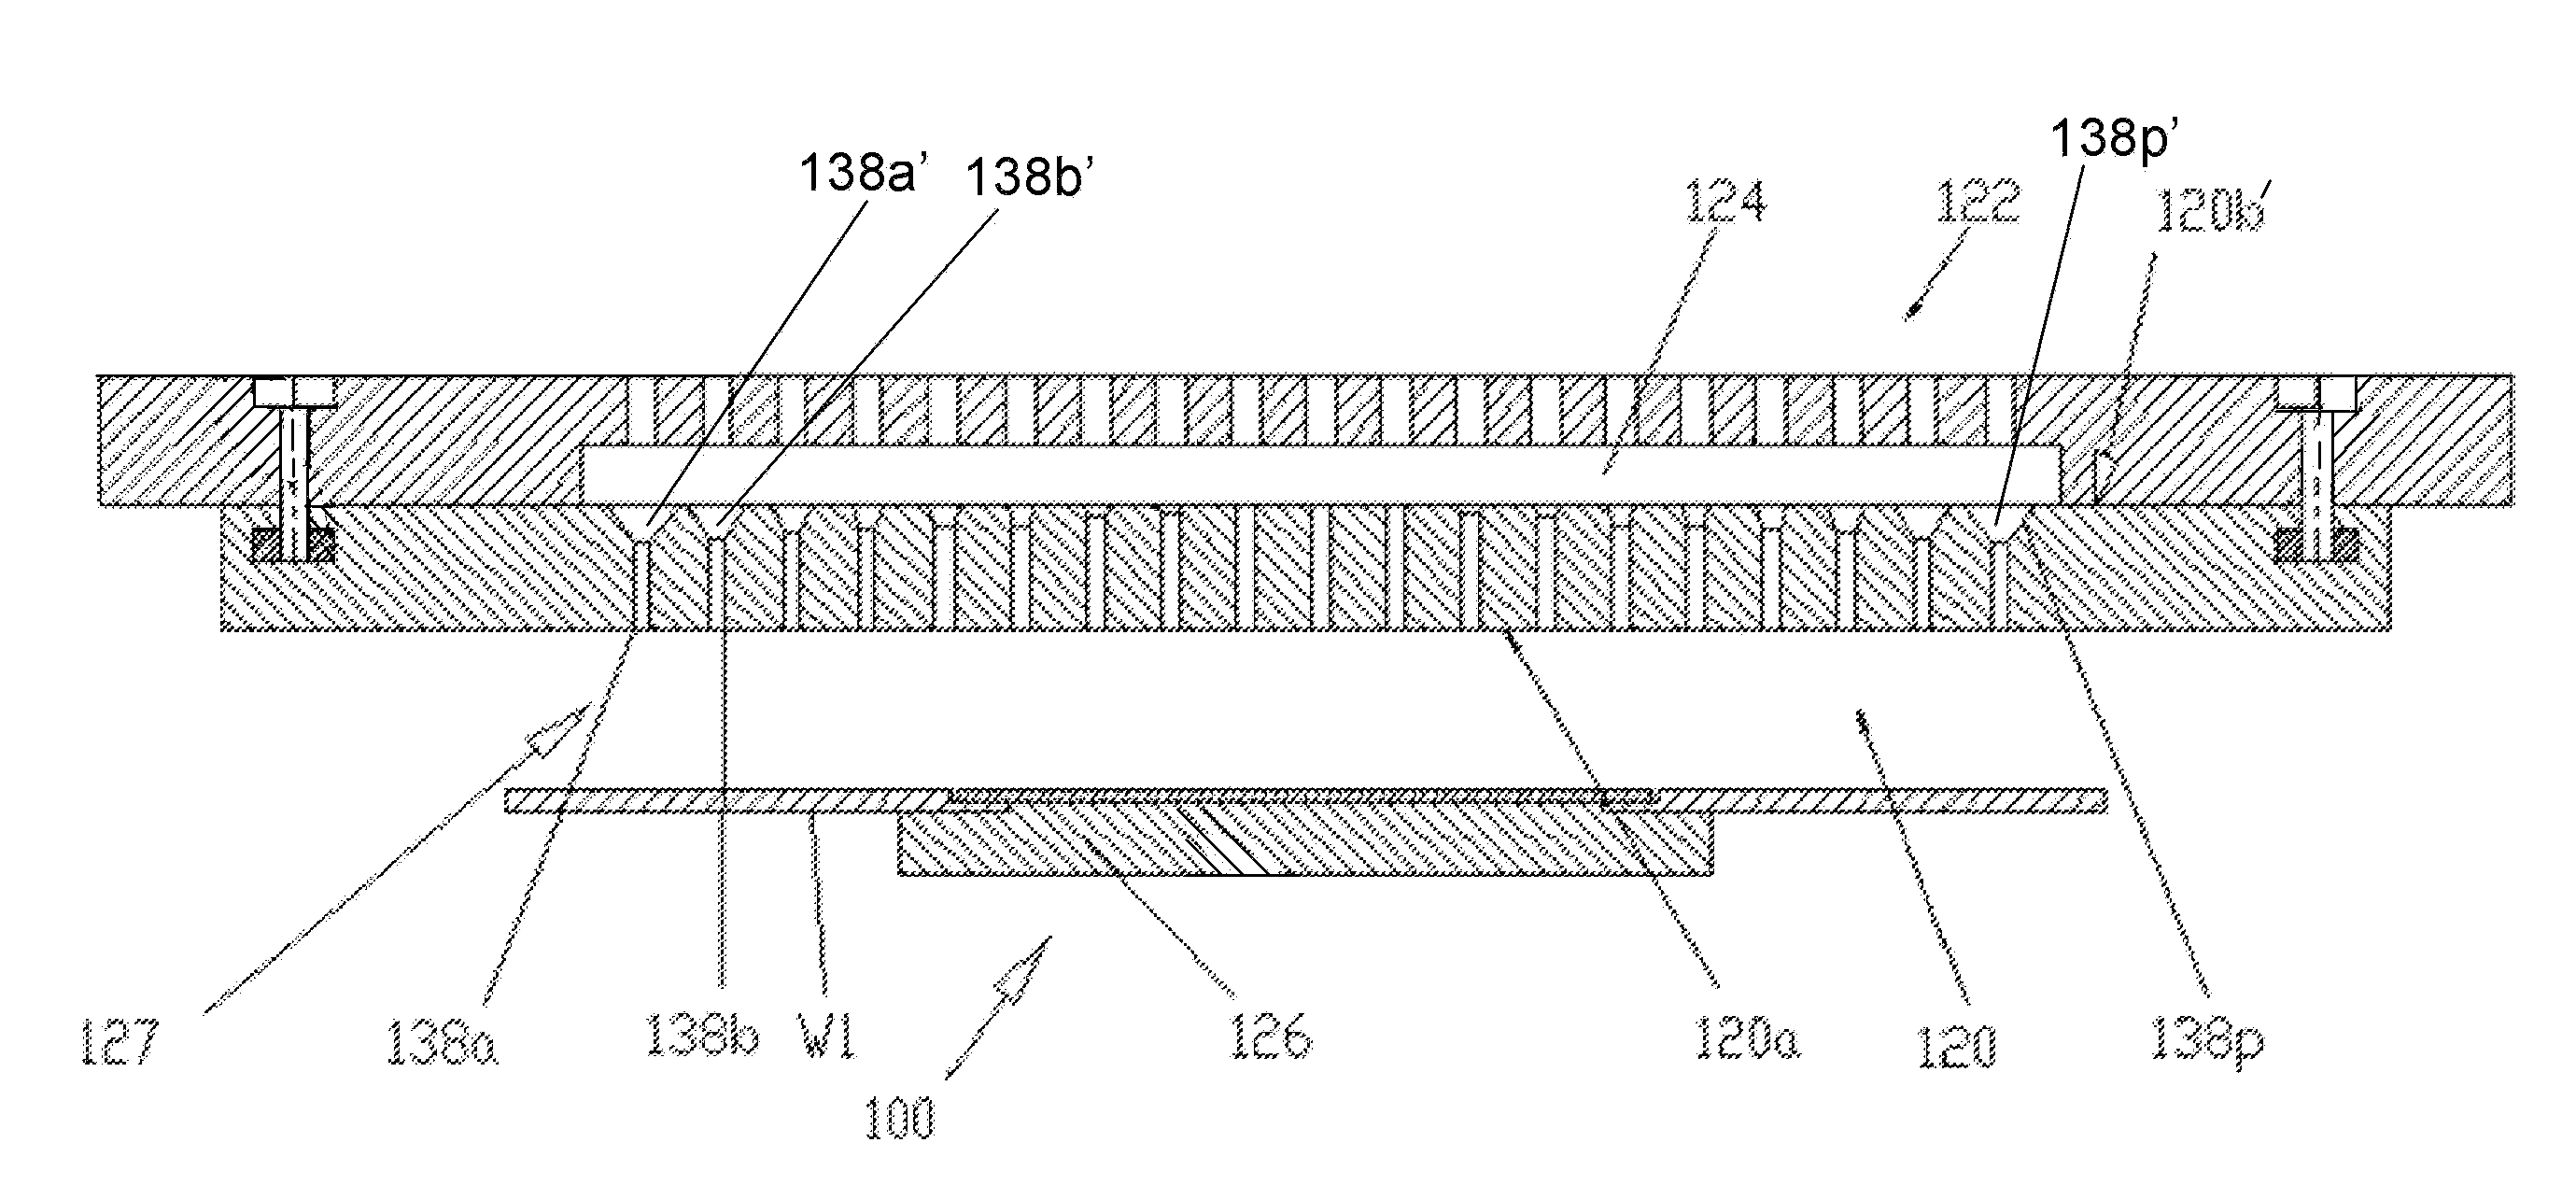 Showerhead-cooler system of a semiconductor-processing chamber for semiconductor wafers of large area